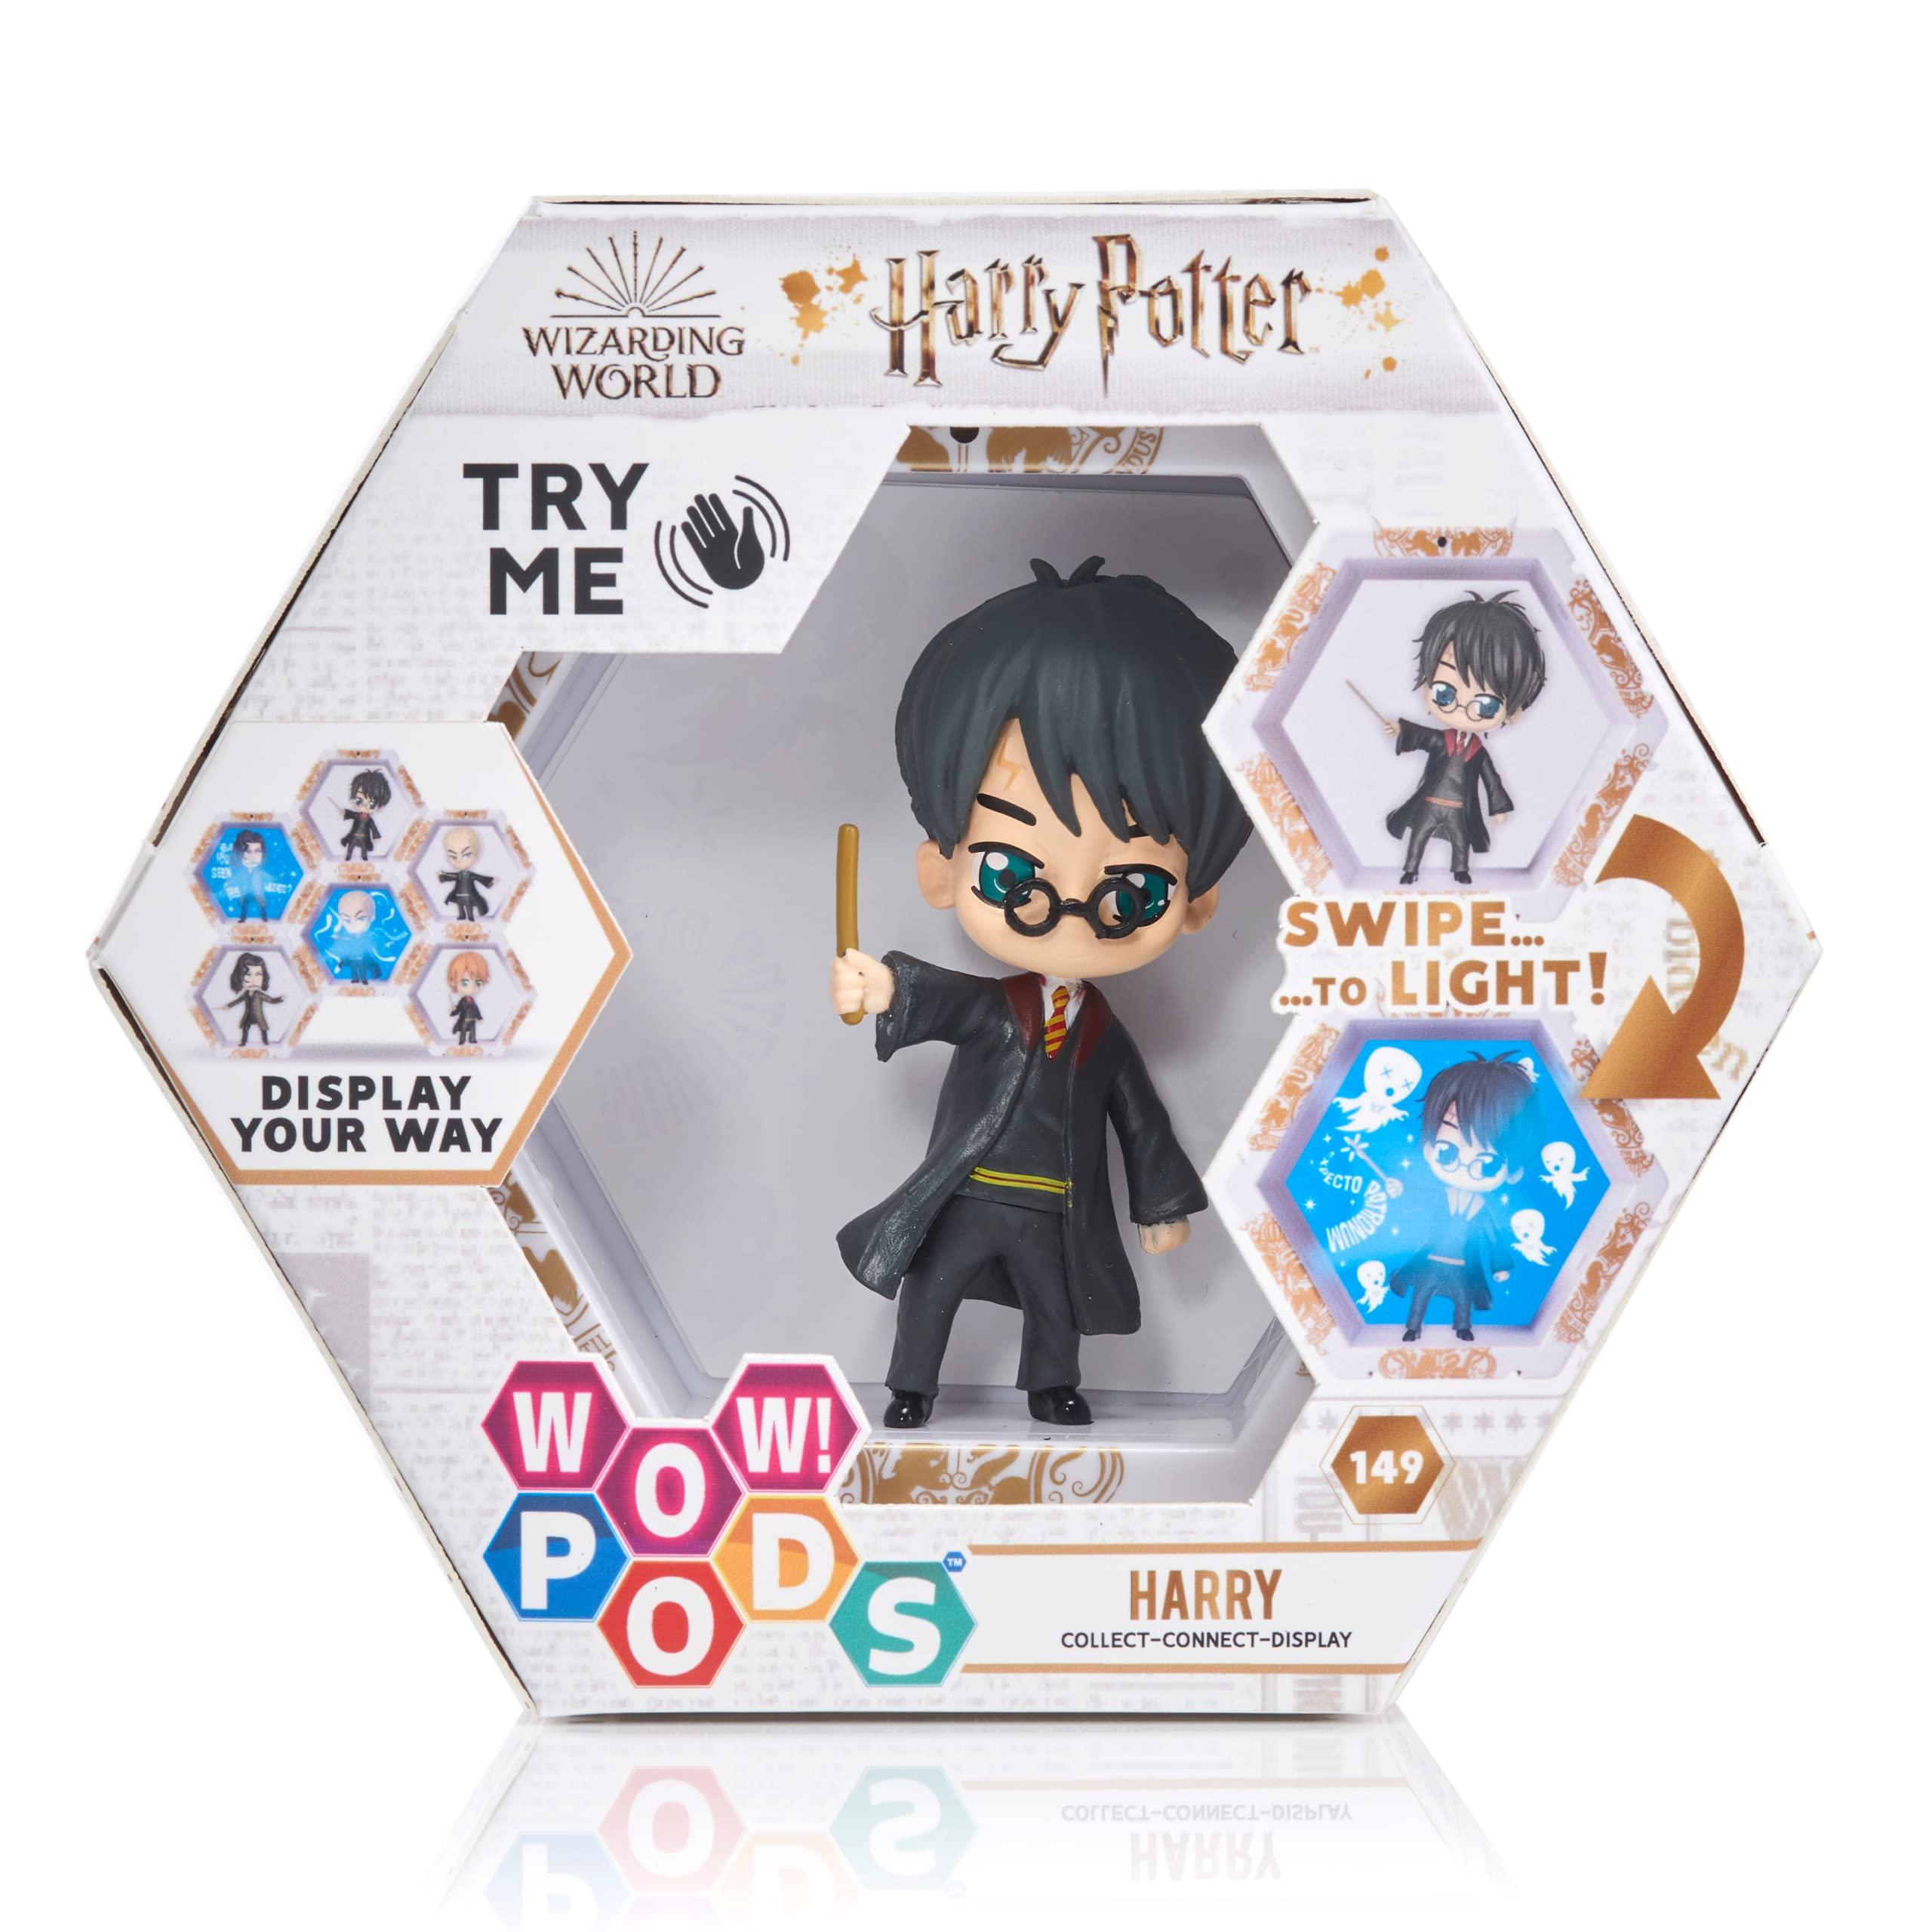 WOW! PODS Harry Potter Wizarding World Light-Up Bobble-Head Figure Series 2 | Official Collectable Toy with Mystery Light Reveal | Collect Connect and Display